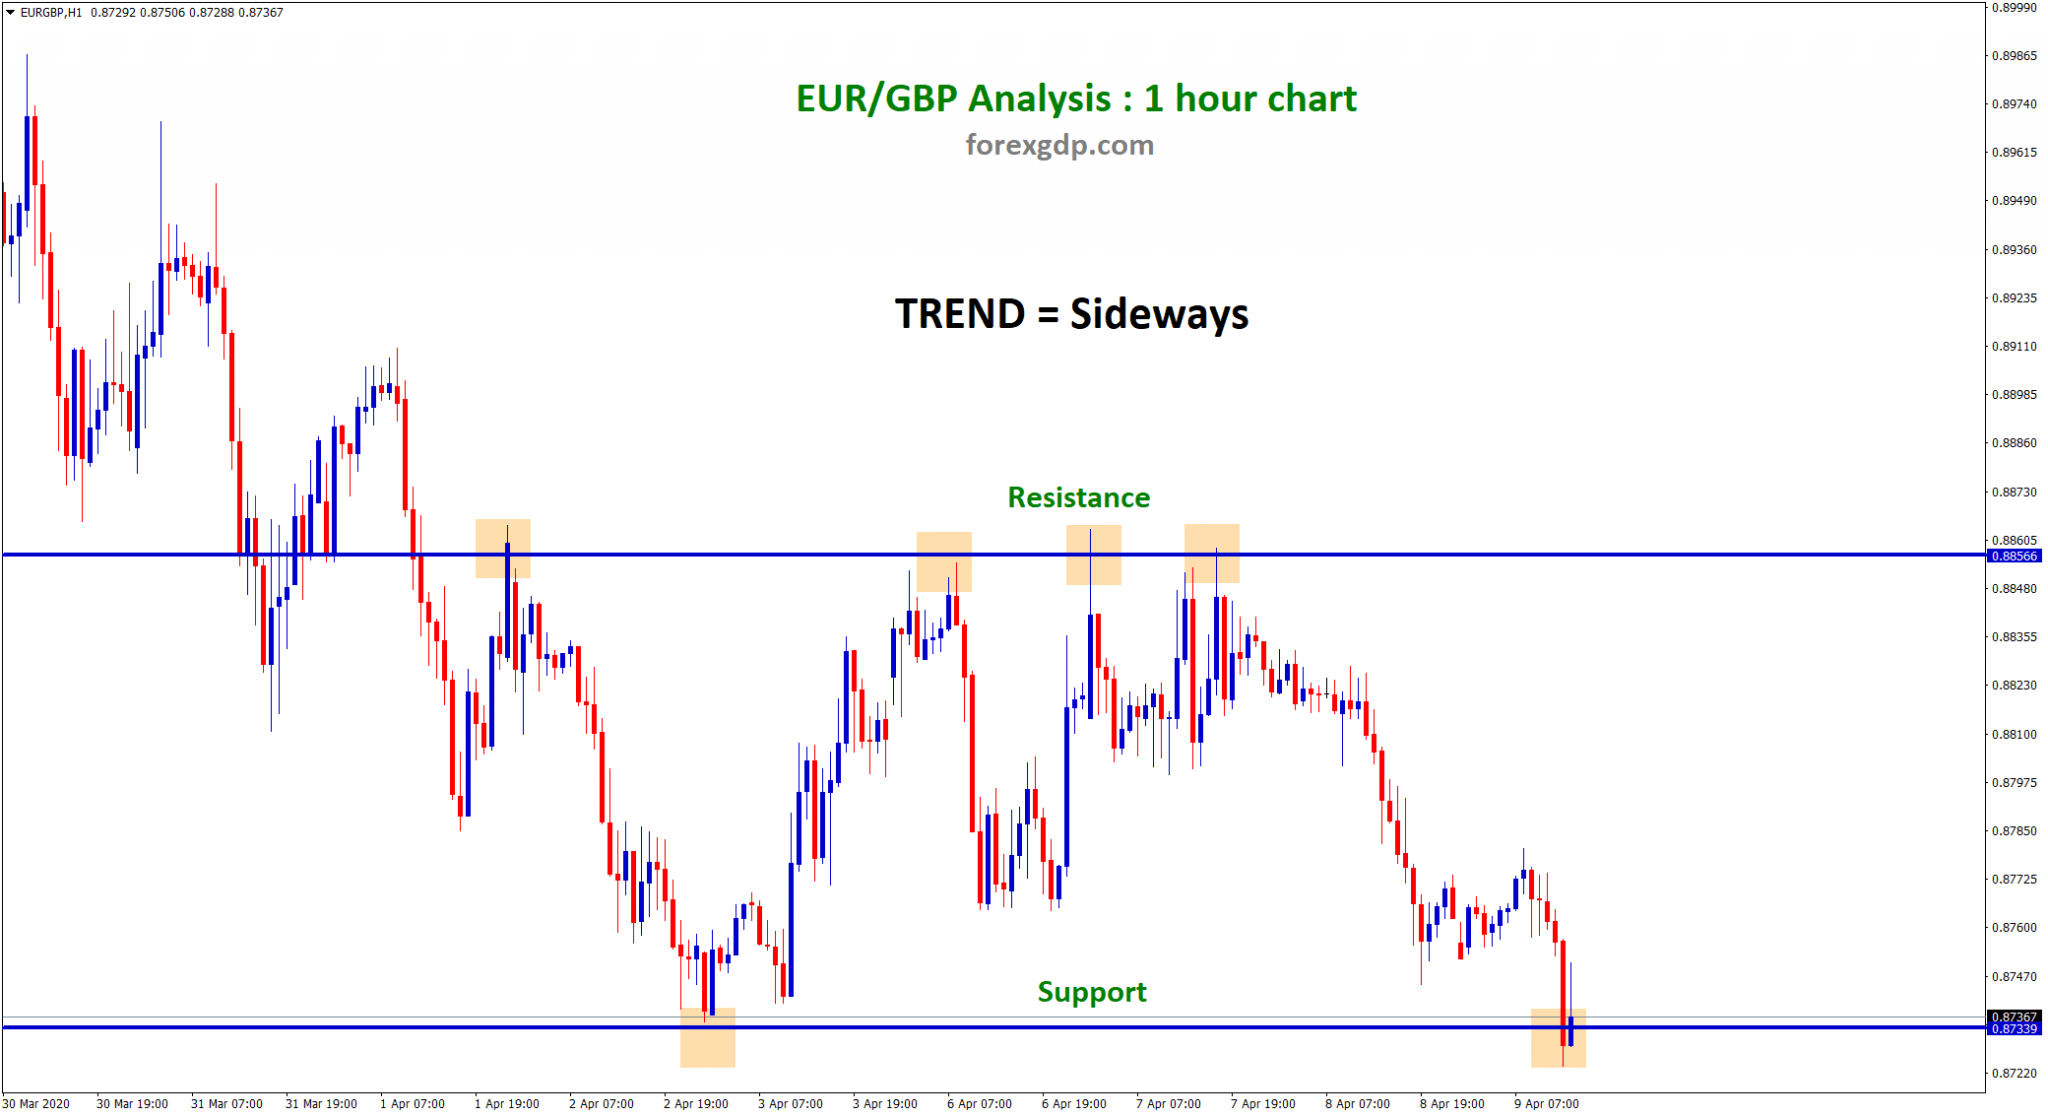 EUR GBP trend sideways between support and resistance level